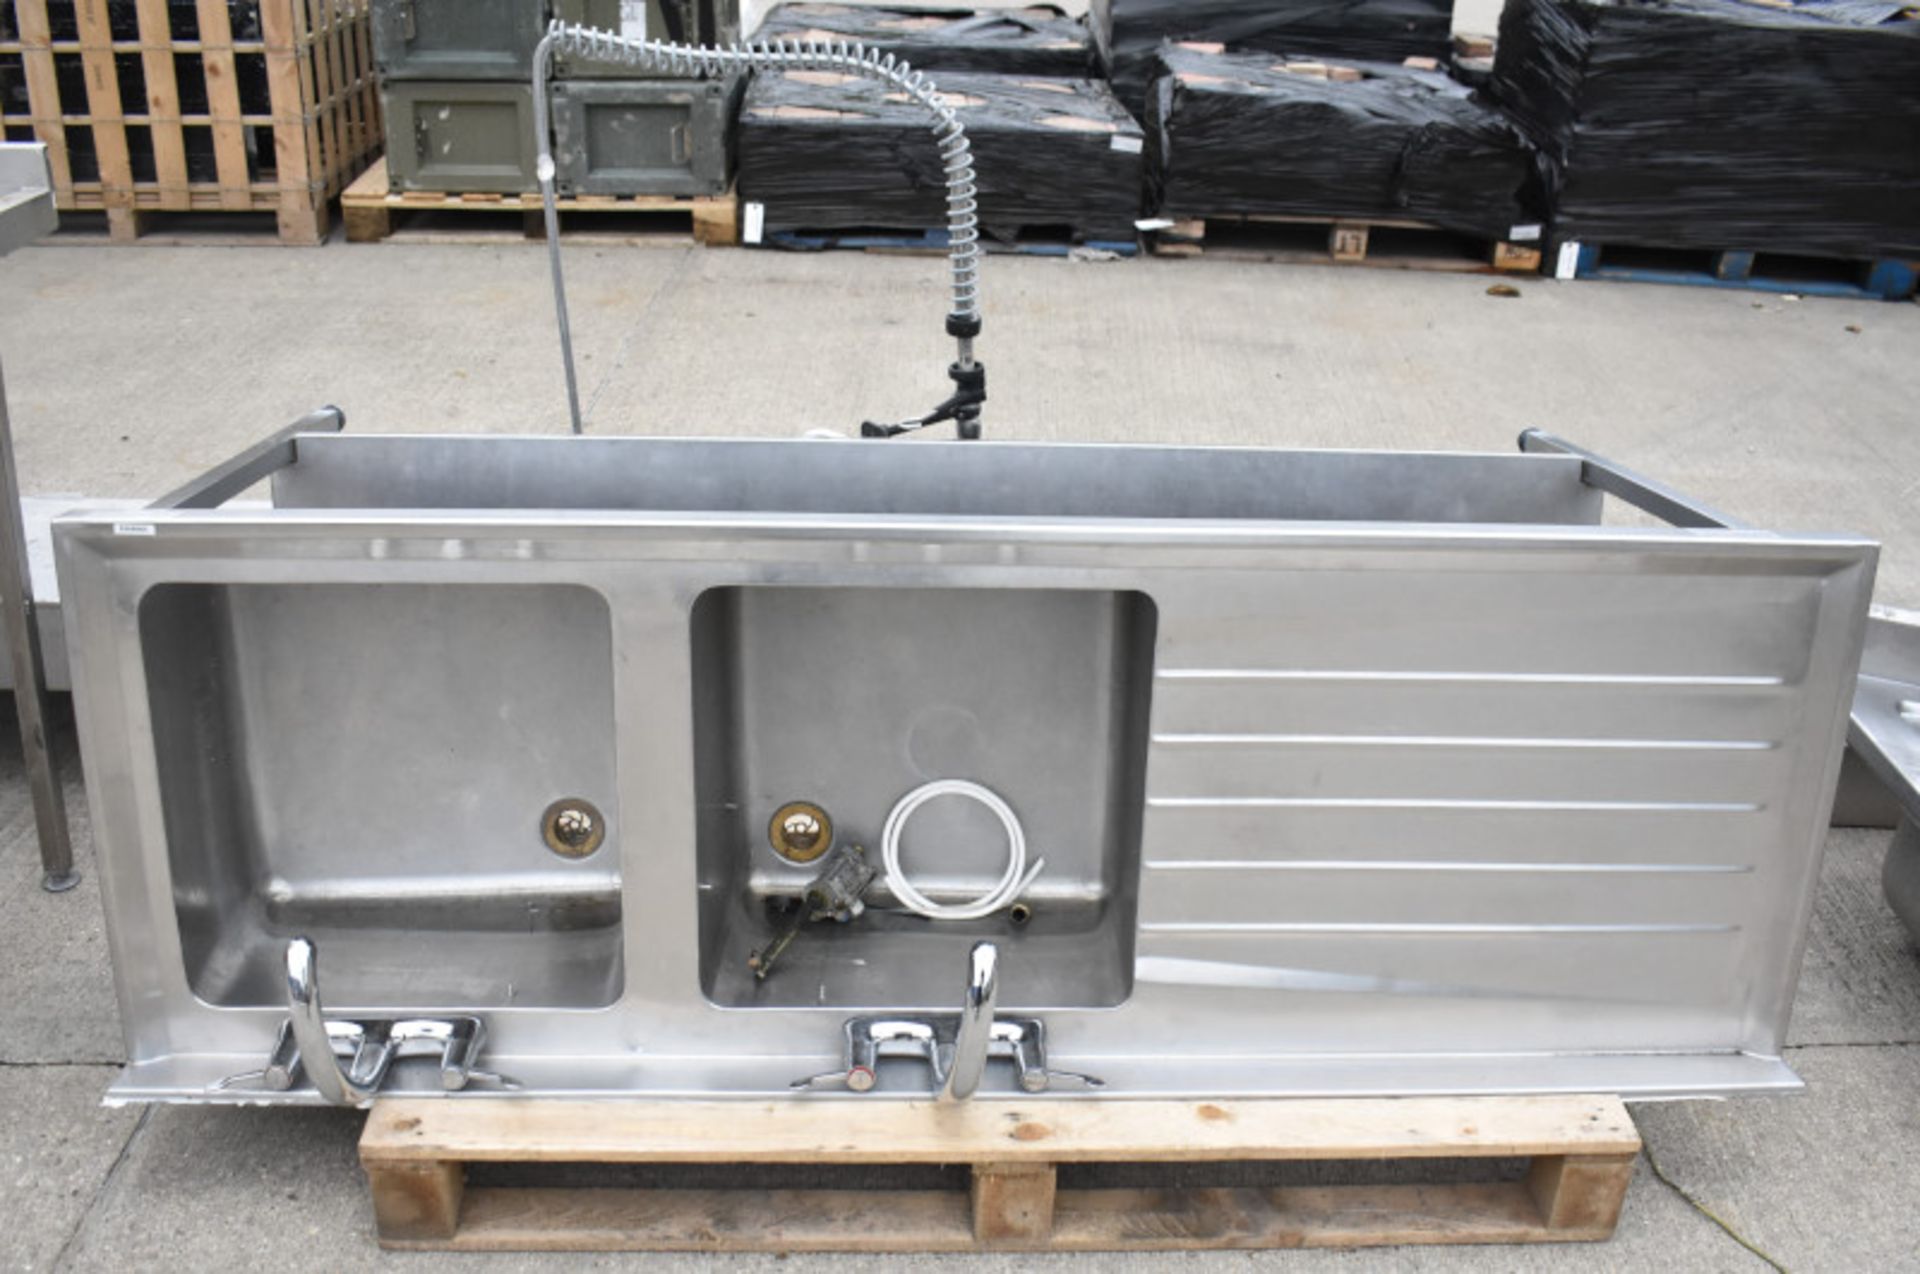 Stainless steel Double Sink Unit L 1800mm x D 600mm x H 920mm